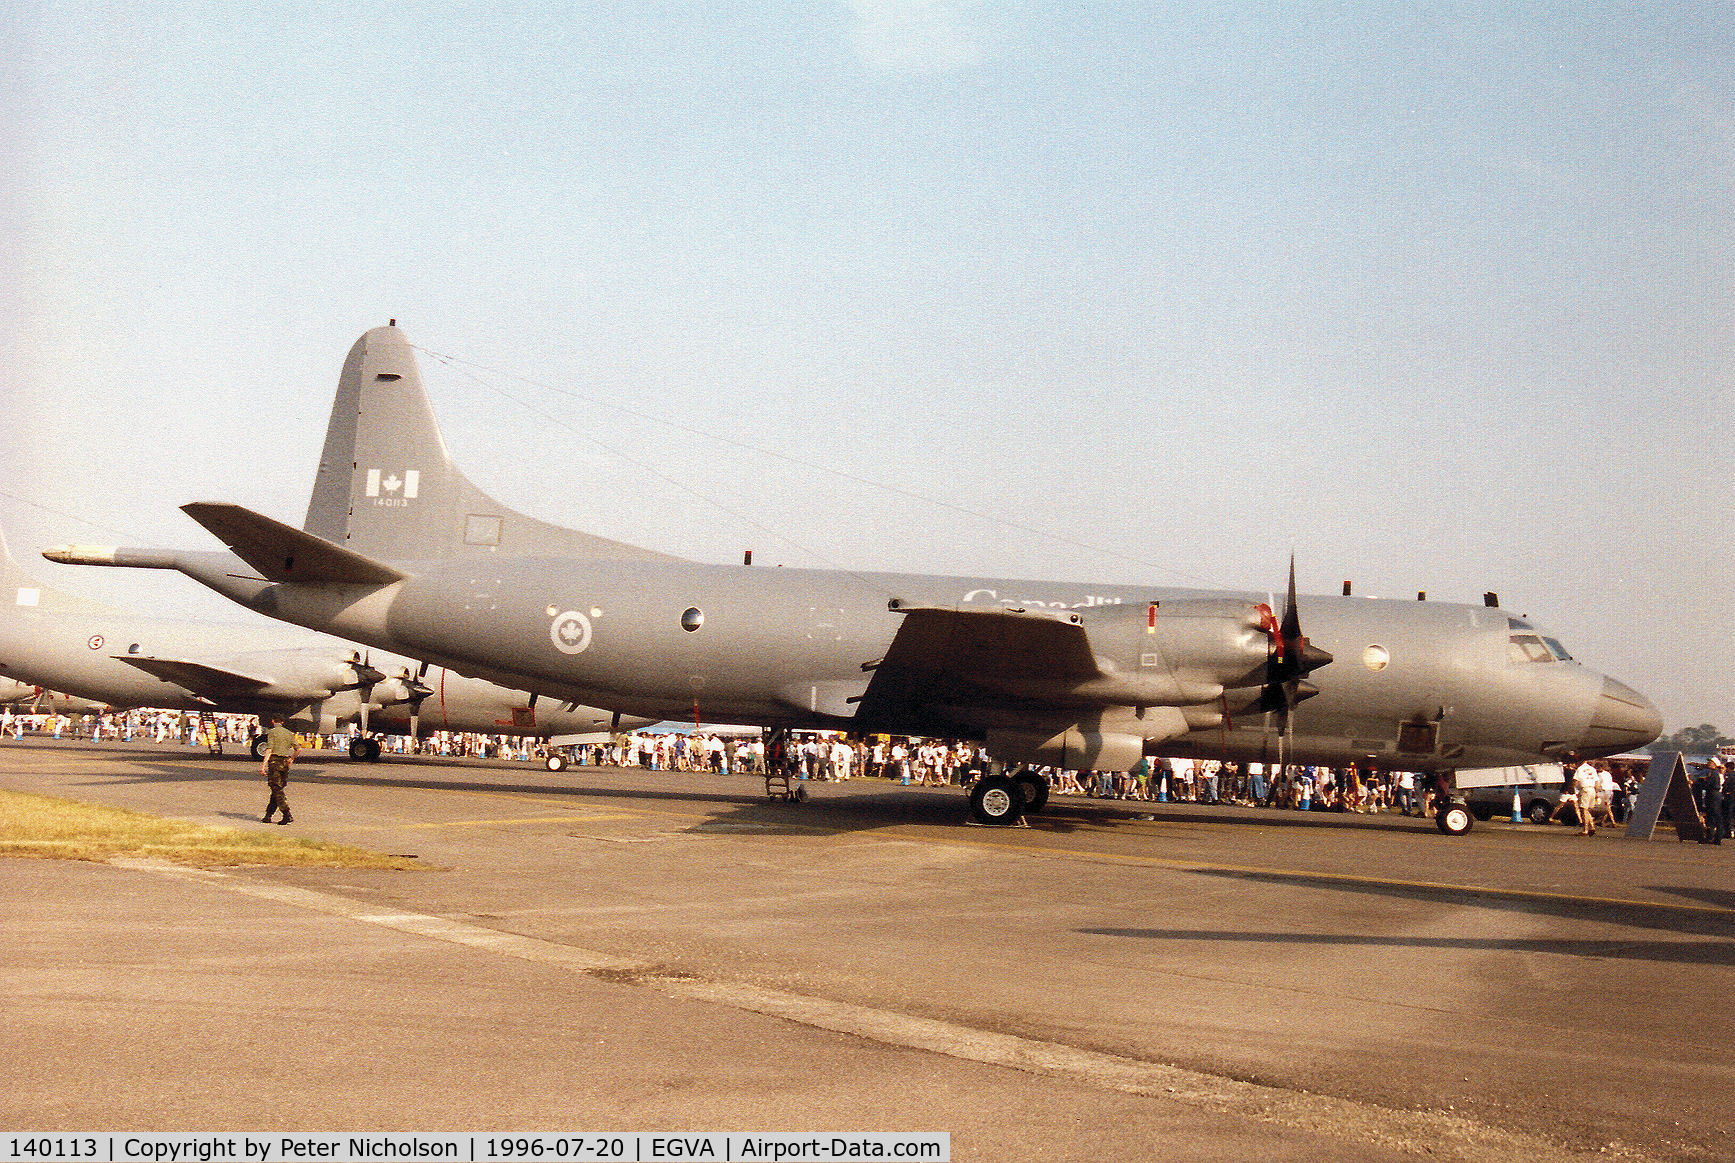 140113, Lockheed CP-140 Aurora C/N 285B-5717, CP-140 Aurora of 14 Wing Canadian Armed Forces on display at the 1996 Royal Intnl Air Tattoo at RAF Fairford.